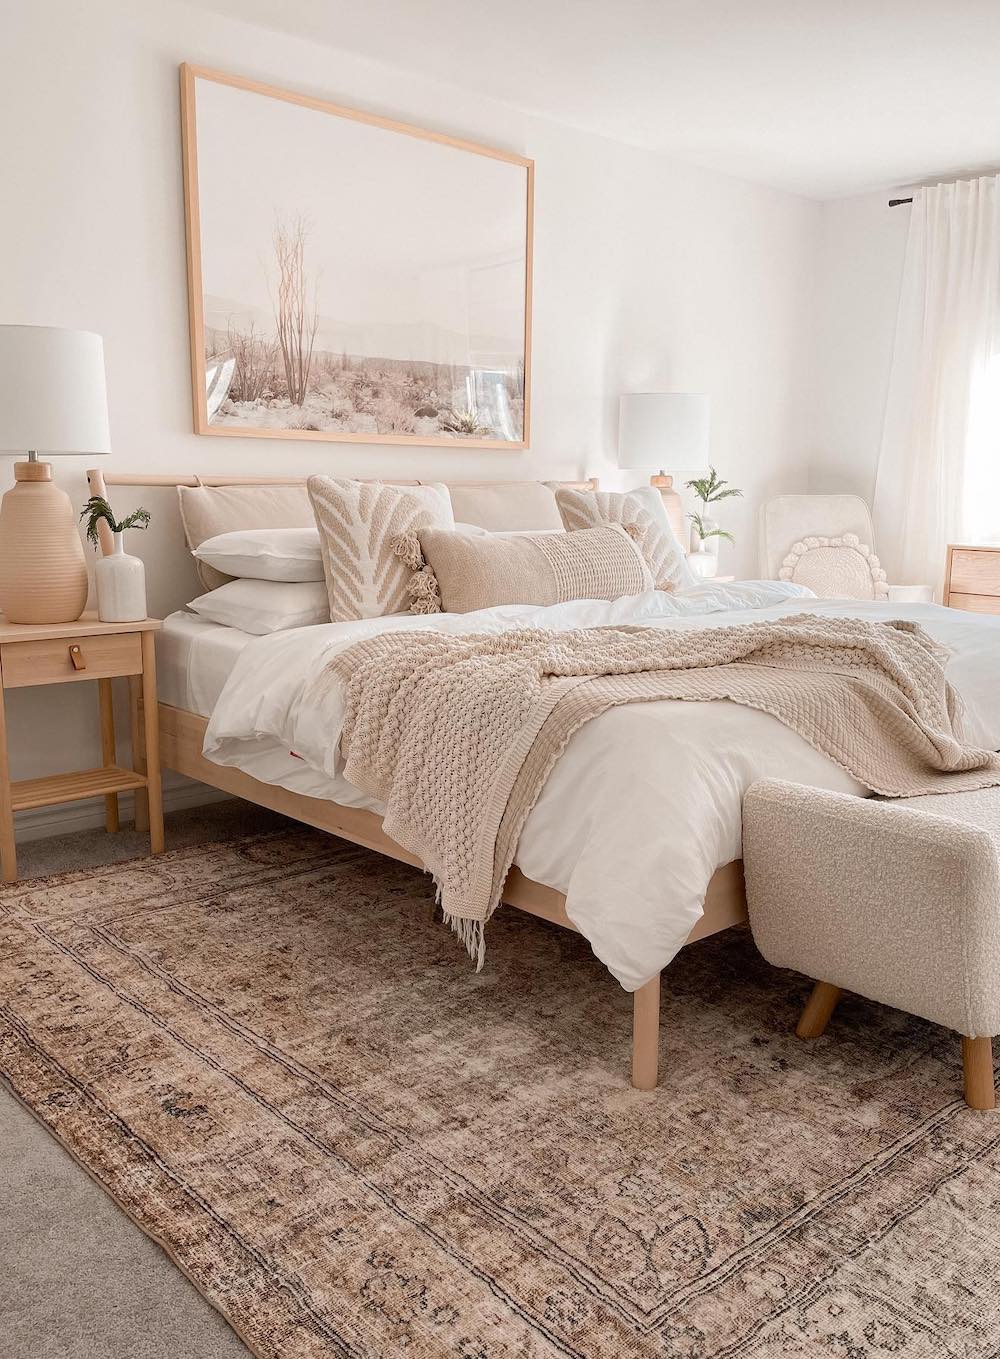 a beige and ivory boho bedroom with classic bohemian textures and decor